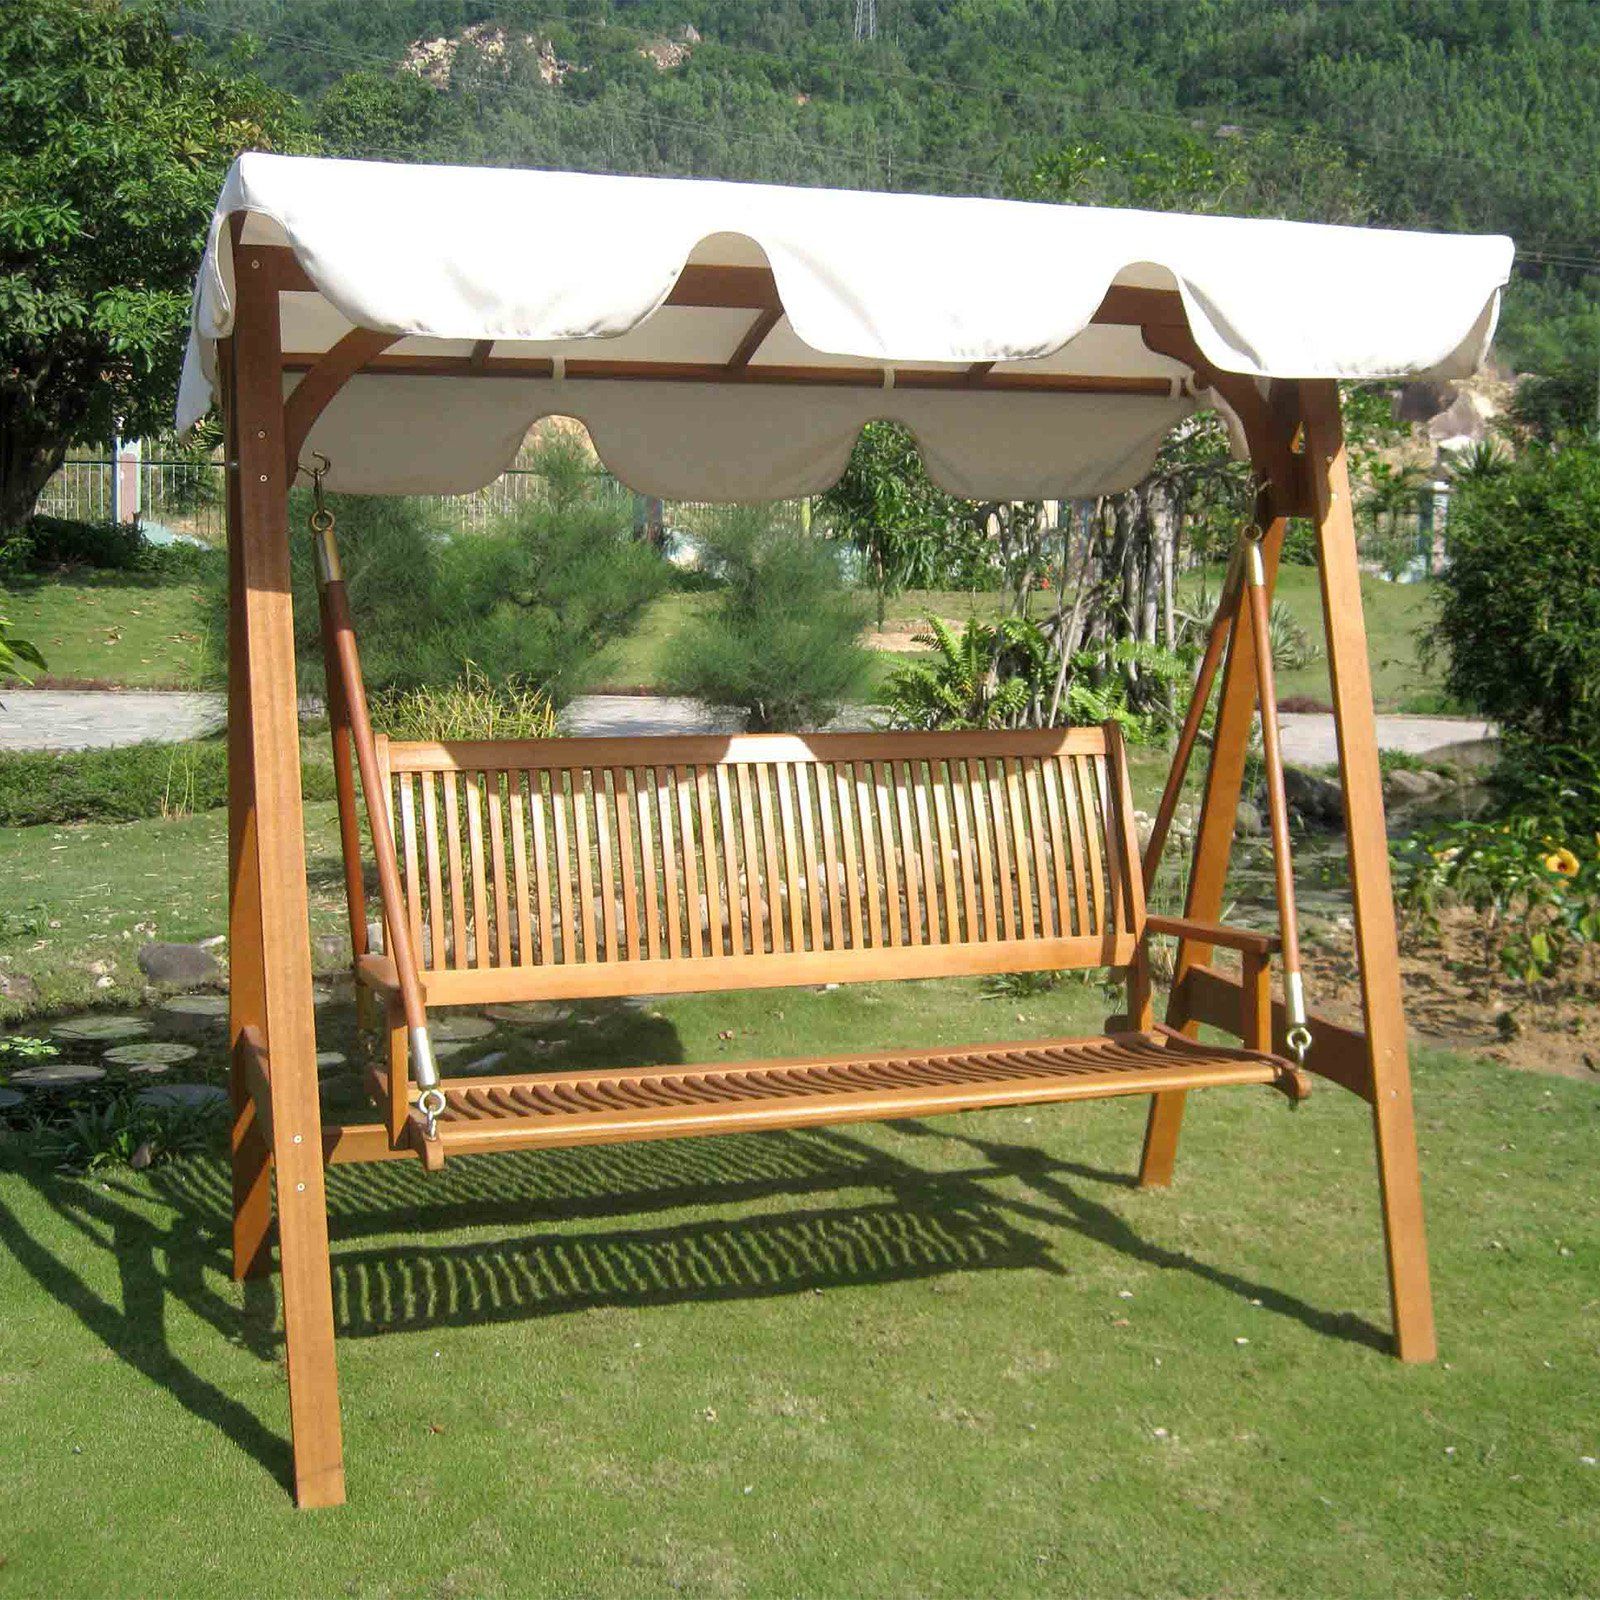 Hammock Patio Backyard Stand – Recognizealeader In 2019 Outdoor Canopy Hammock Porch Swings With Stand (View 11 of 30)